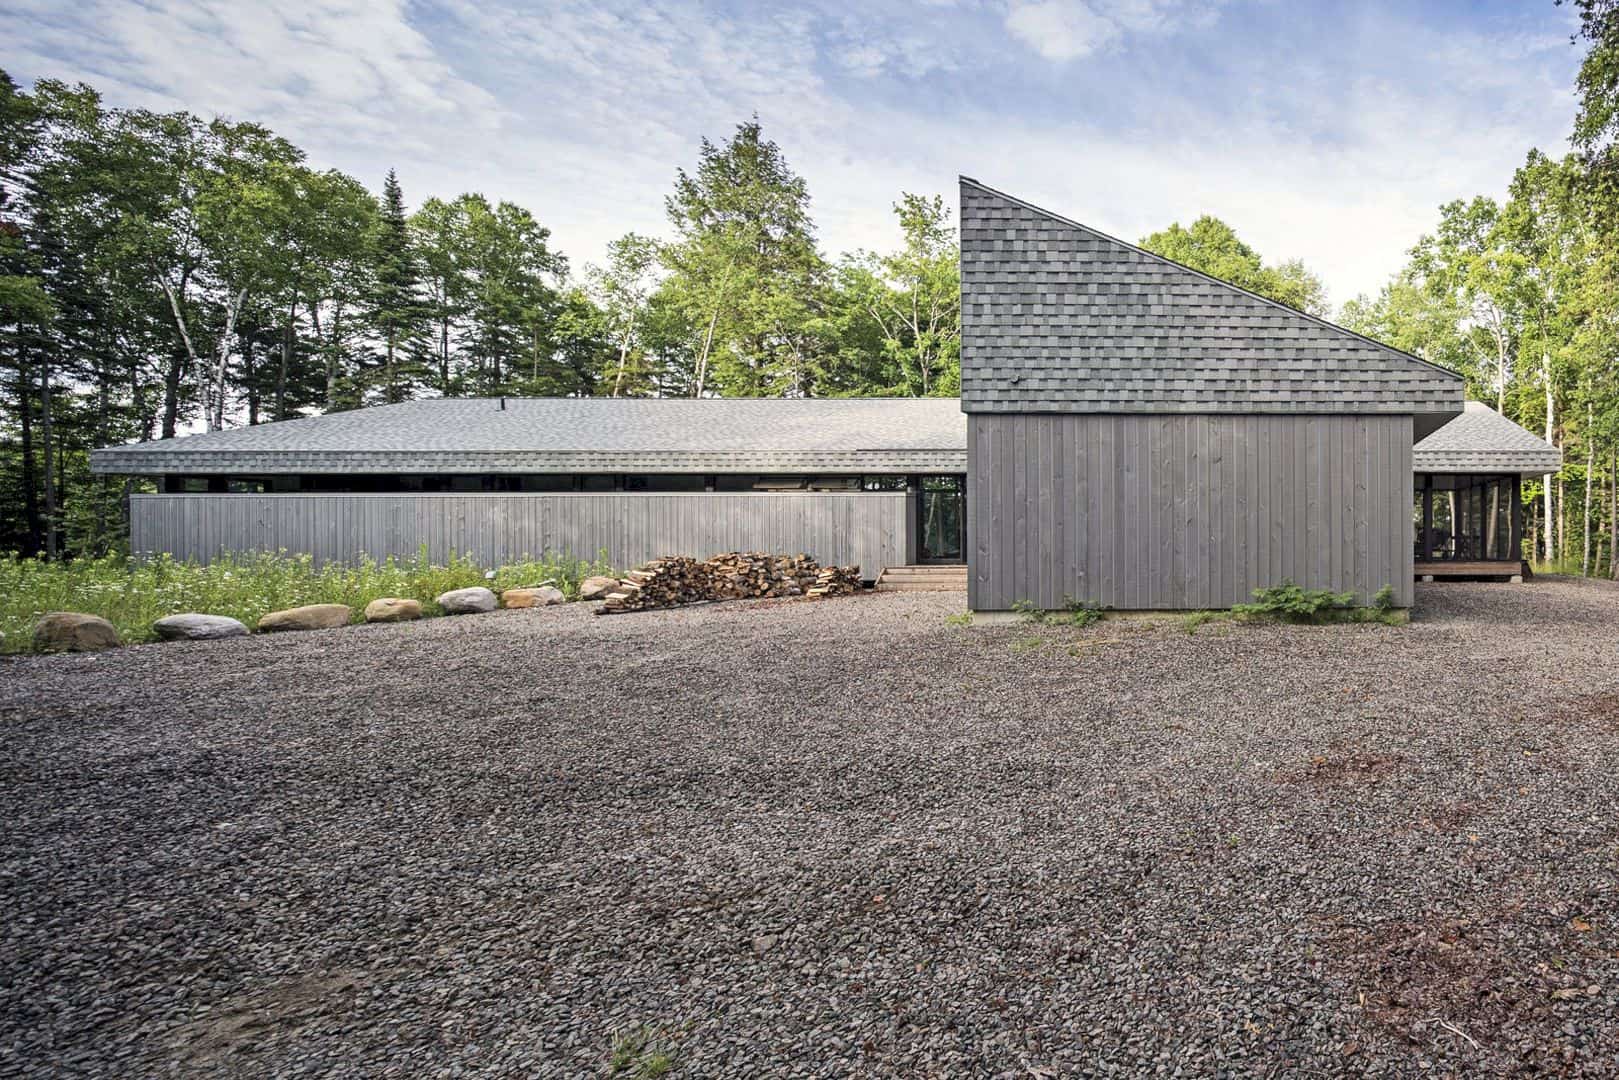 A Sustainablecottage That Coexists With The Ontario Wilderness 4